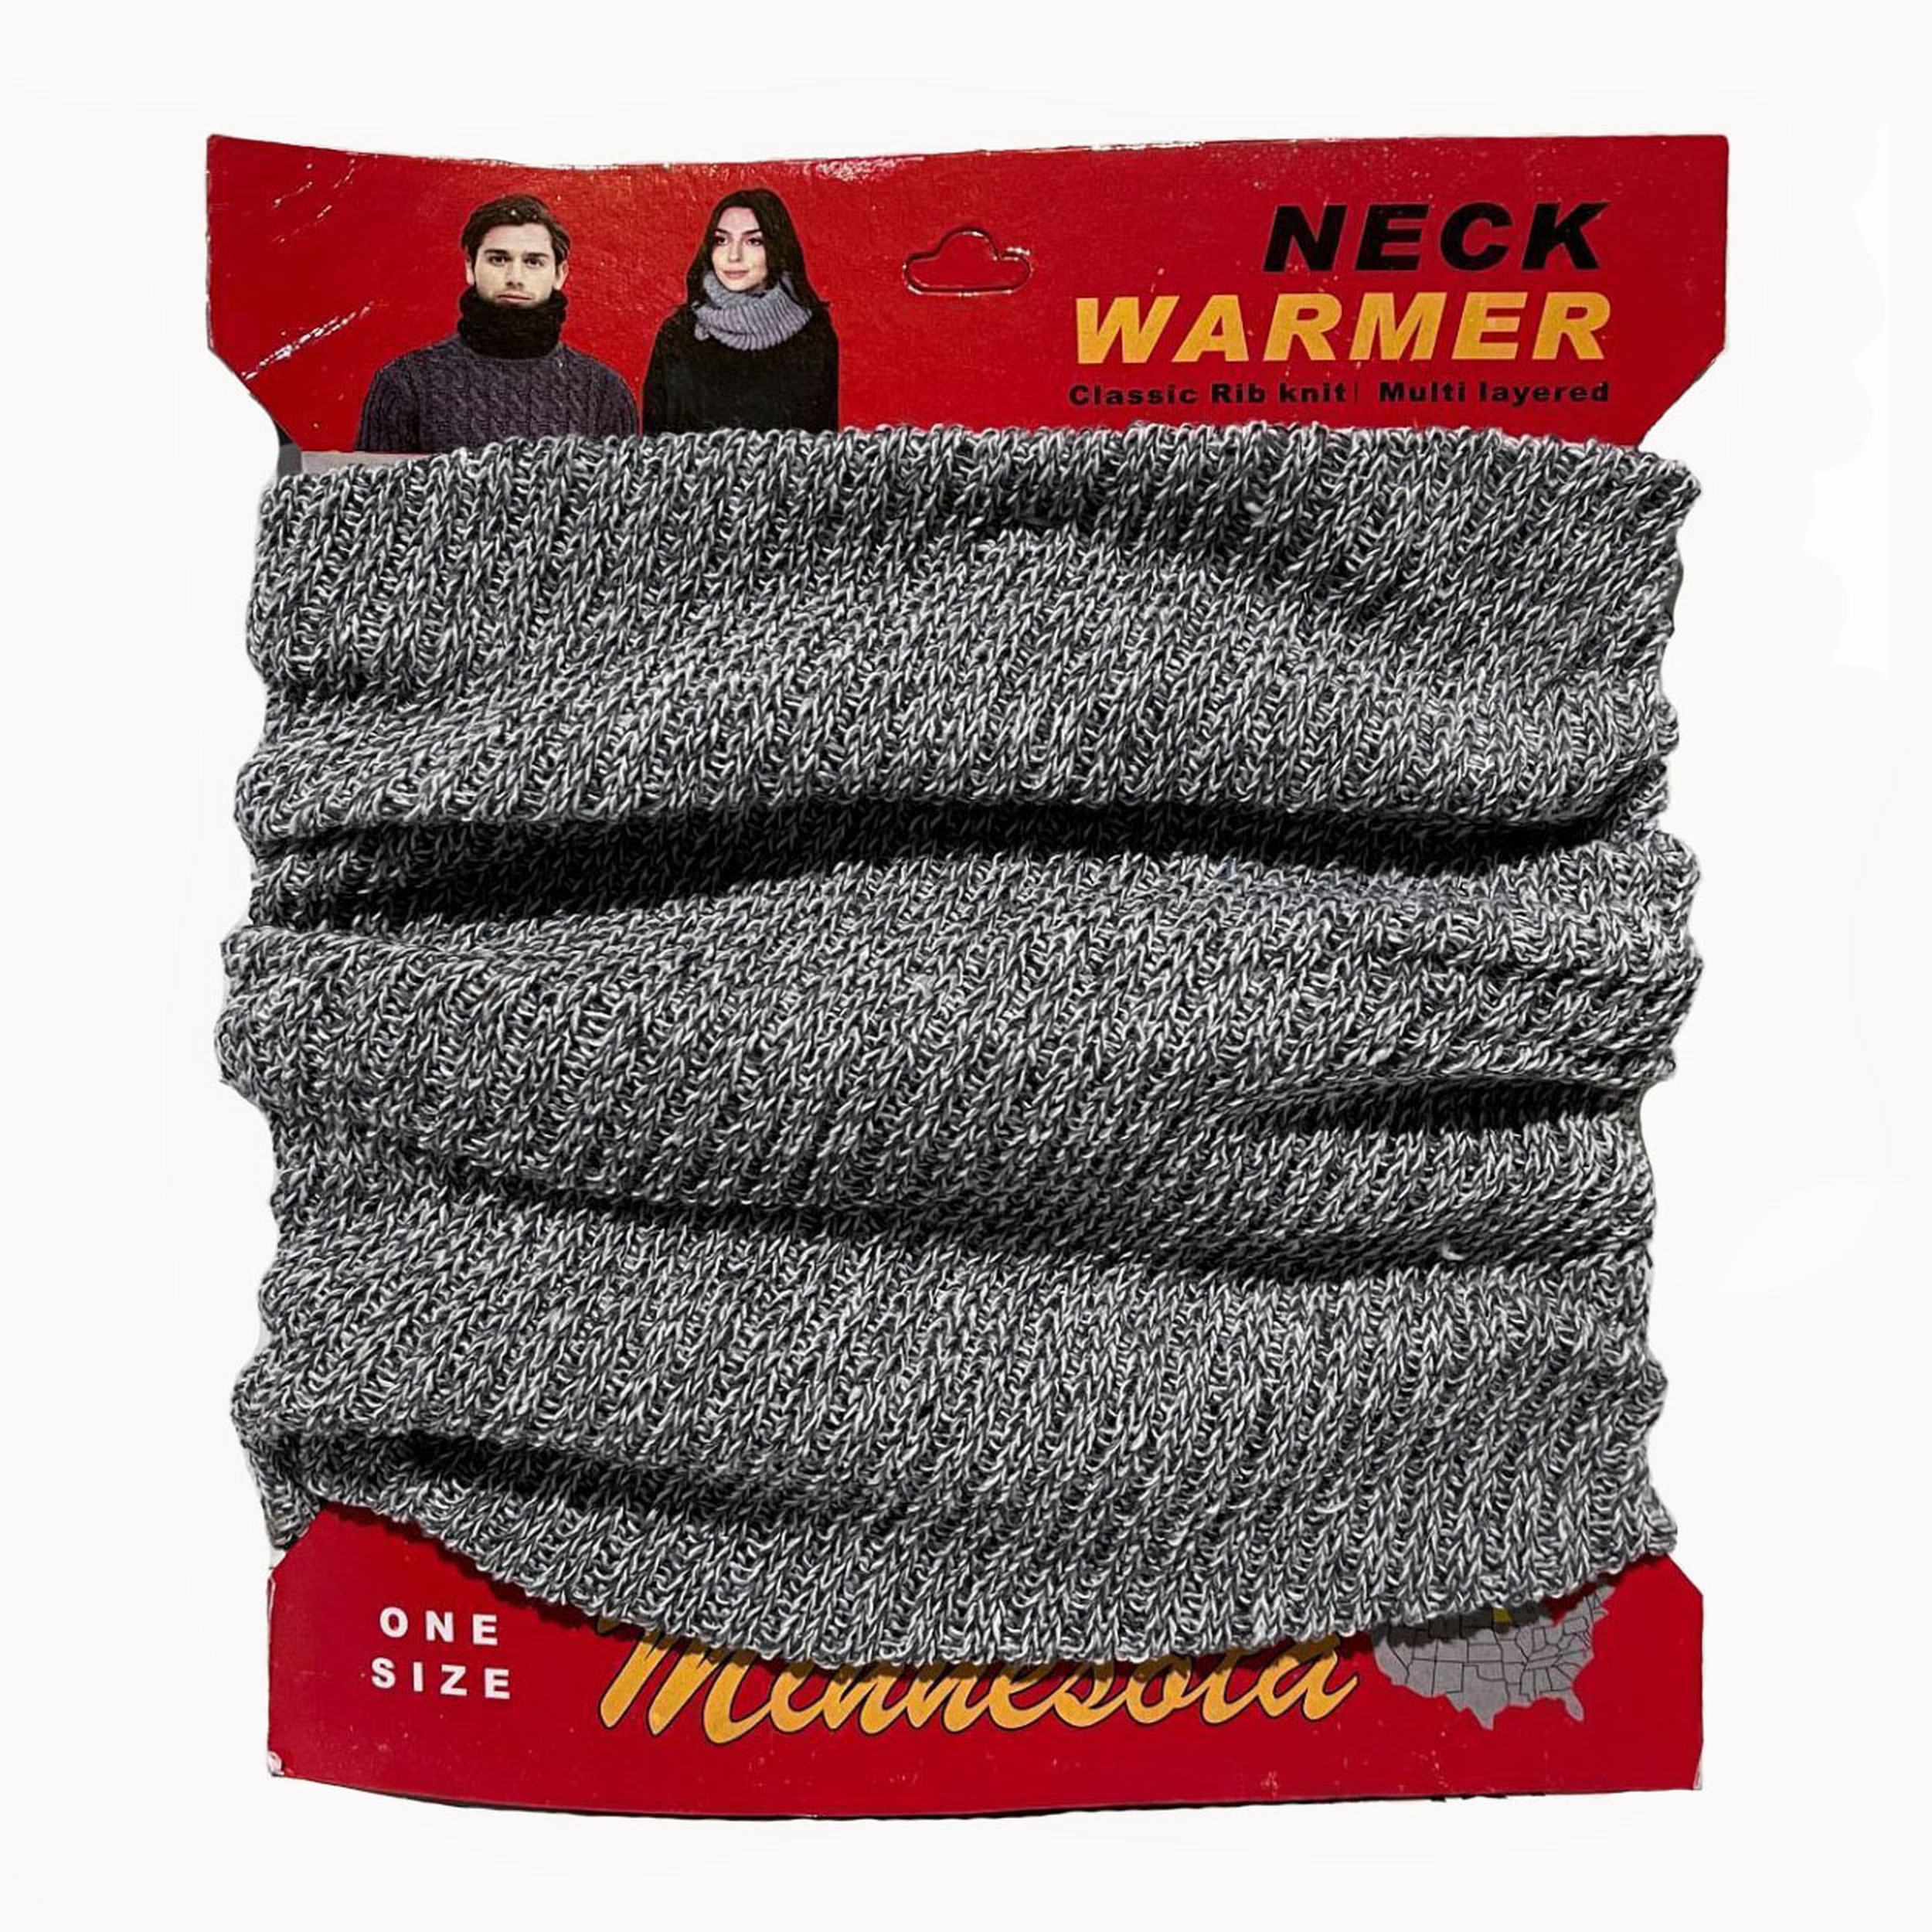 WHOLESALE JOB LOT OF 60 Classic Rib Knit Multi-layered Neck Warmers Snoods in Dark/Med/Light Greys